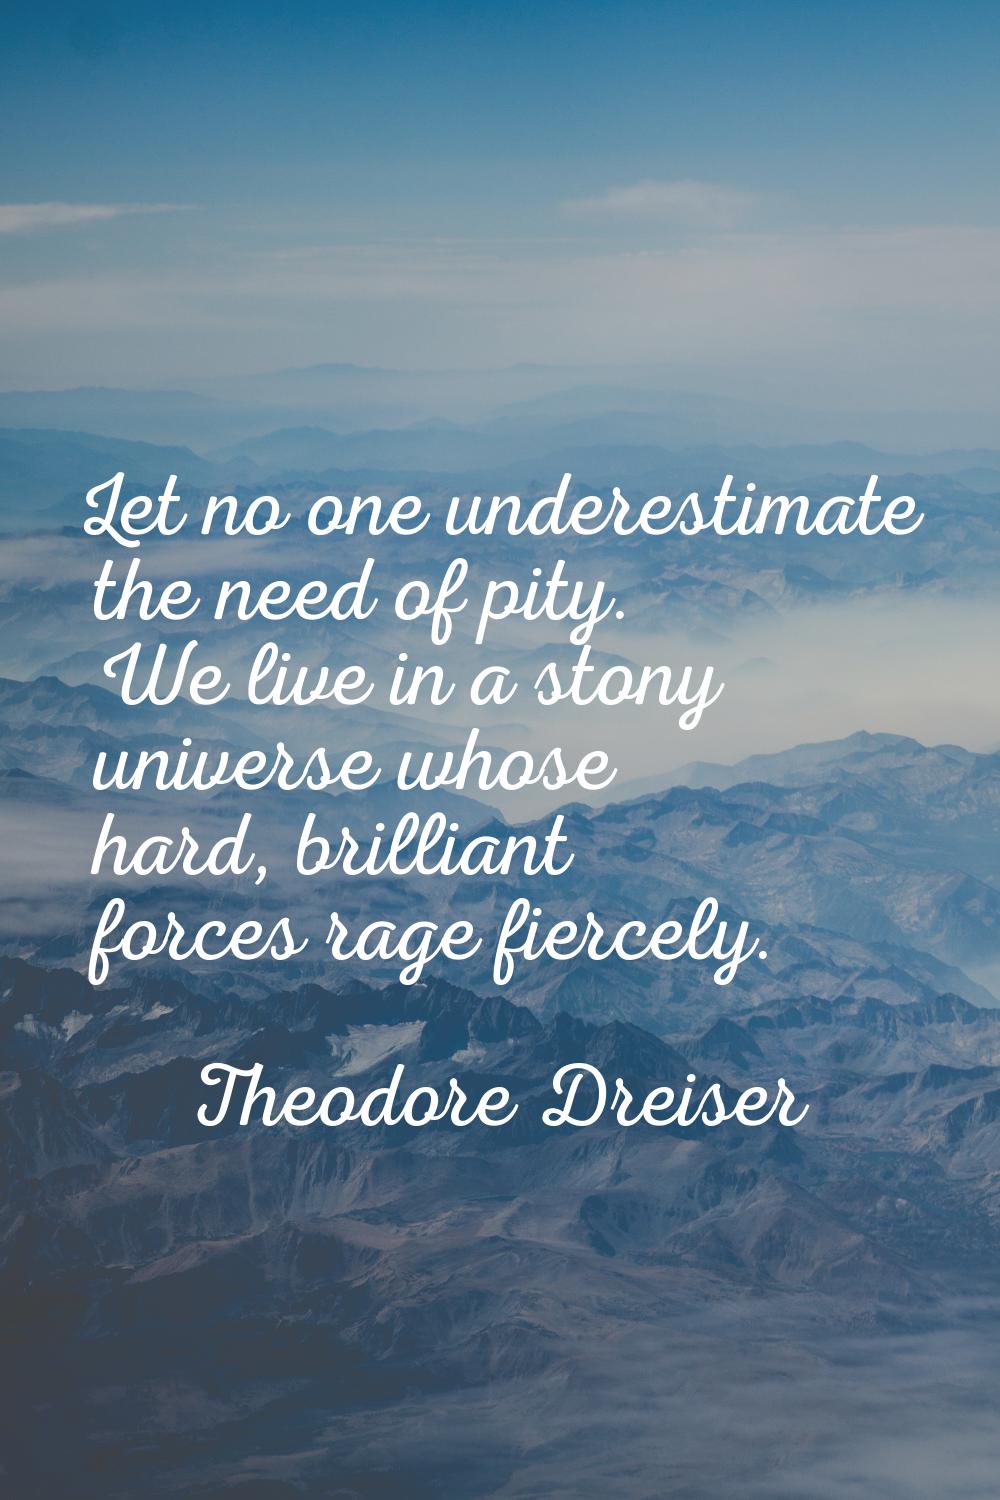 Let no one underestimate the need of pity. We live in a stony universe whose hard, brilliant forces